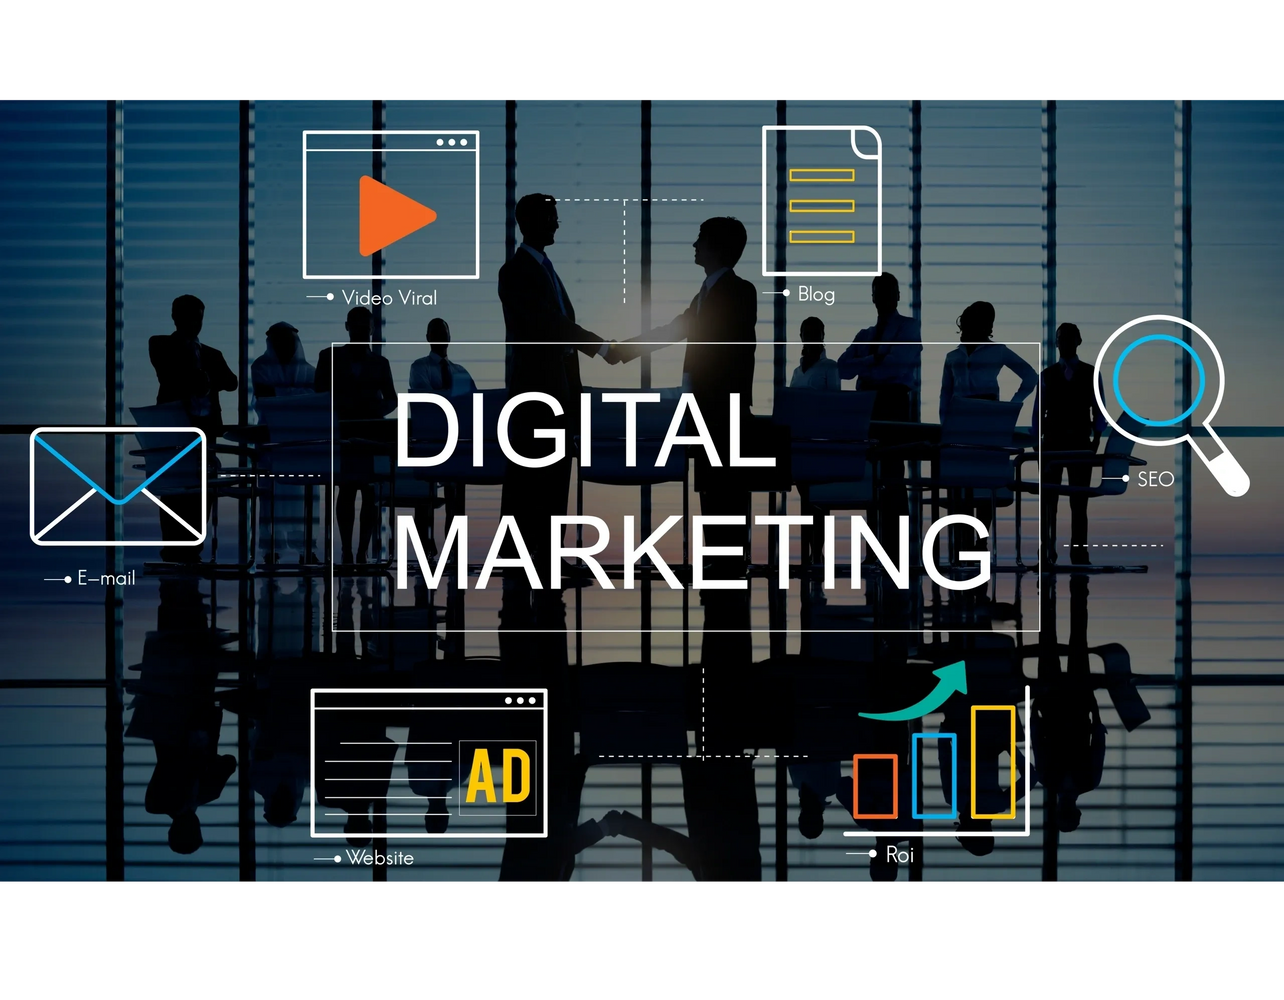 Different ways to grow your business with the help of digital marketing.